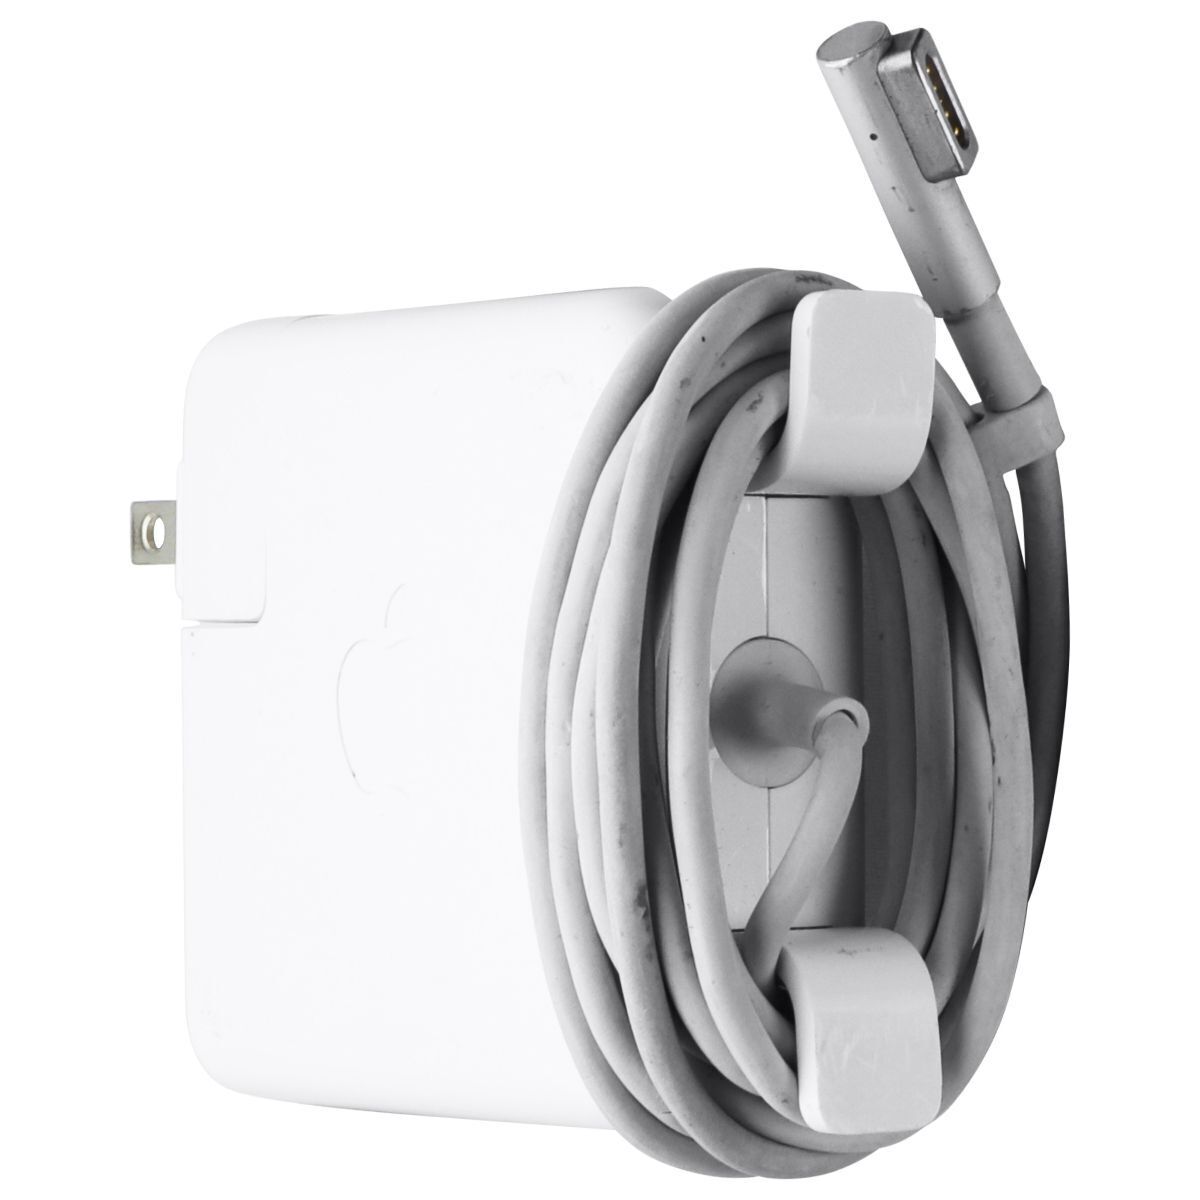 FAIR Apple 60-Watt MagSafe Power Adapter Wall Charger - White (A1344, Old Model)